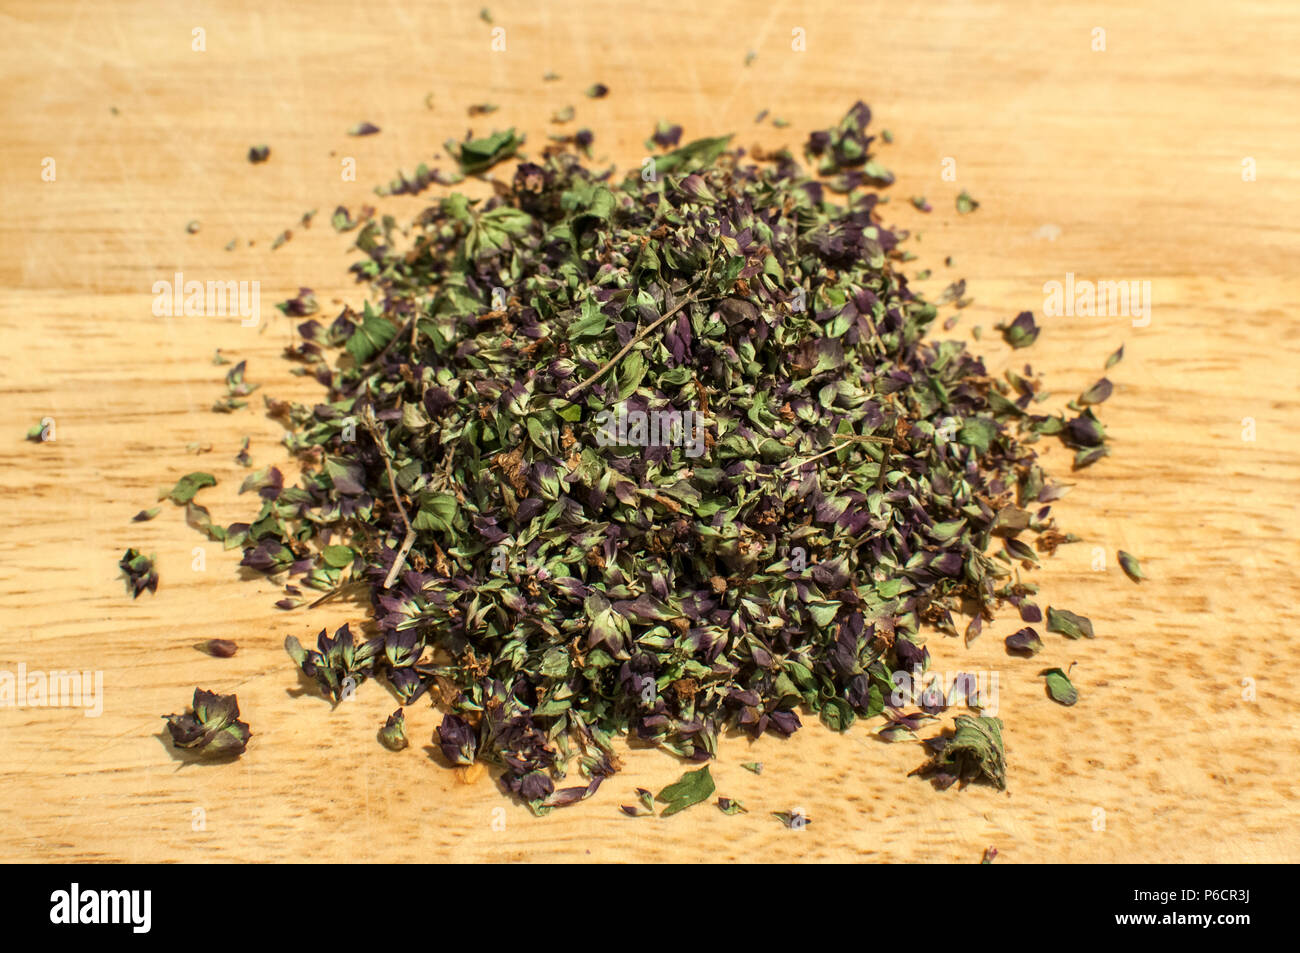 Pile of crushed dried oregano to spice up dishes closeup on wooden board background Stock Photo